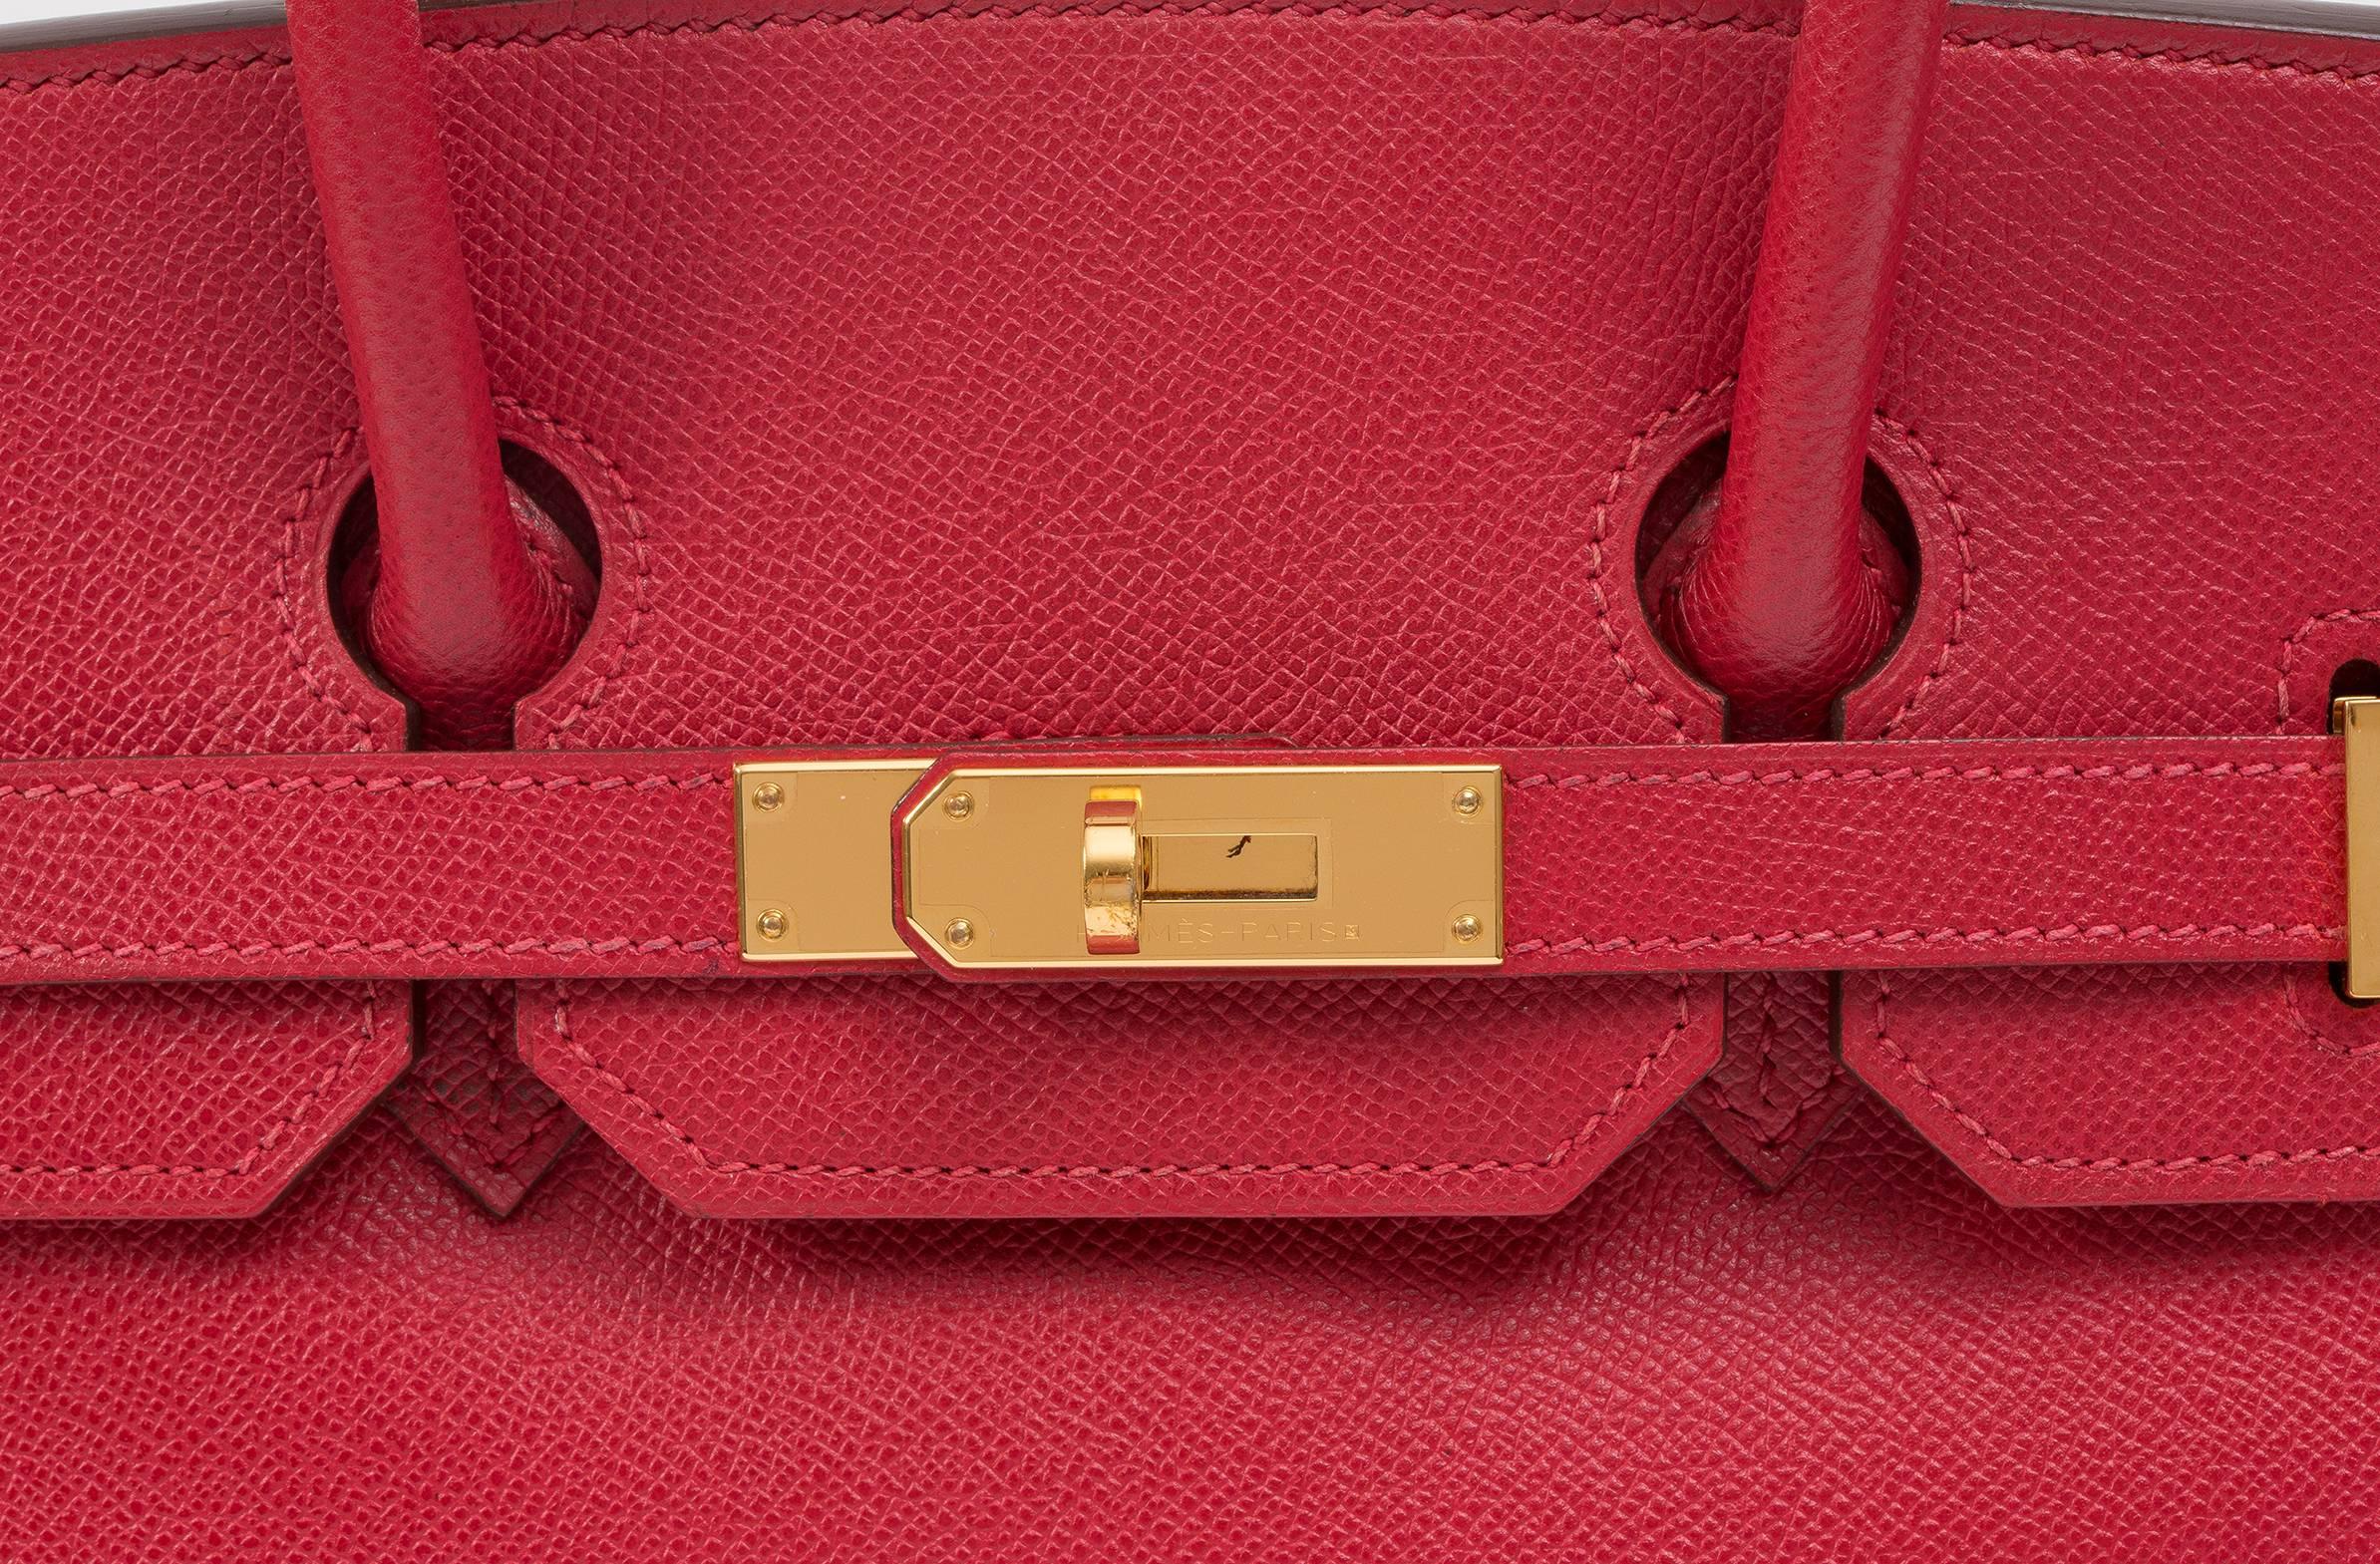 Hermes Birkin 35cm Red  In Excellent Condition For Sale In New York, NY